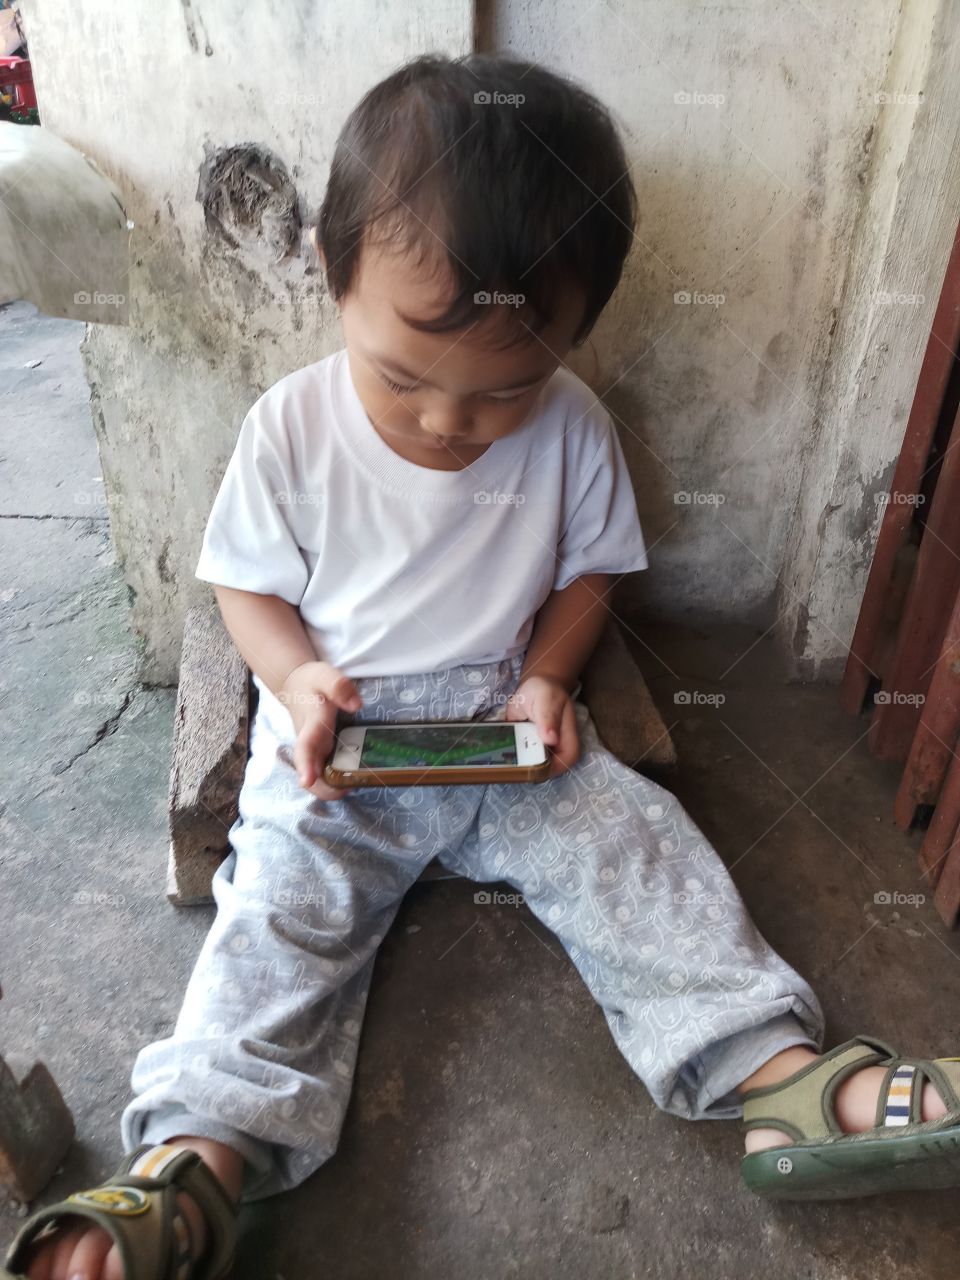 a toddler busy playing using a cellular phone.